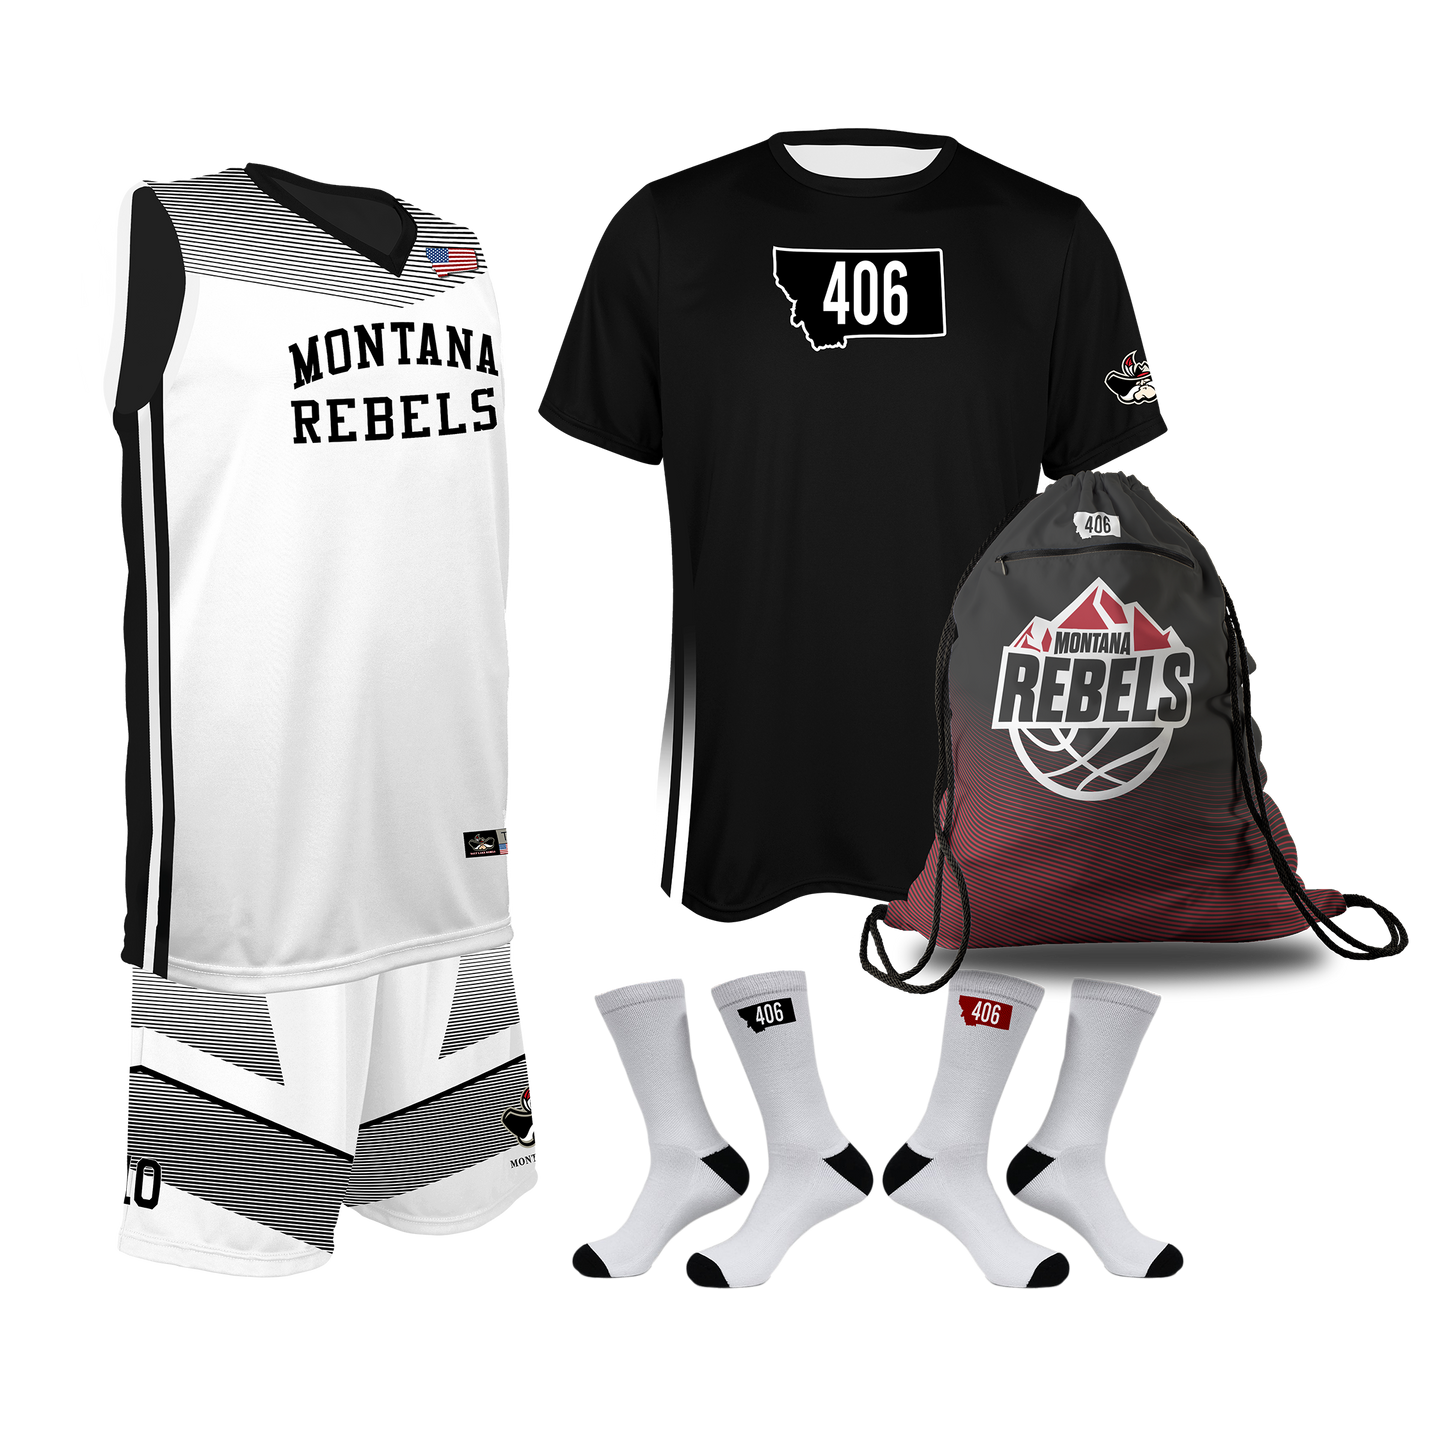 OPTION 2 - Youth Montana Rebels Player Pack